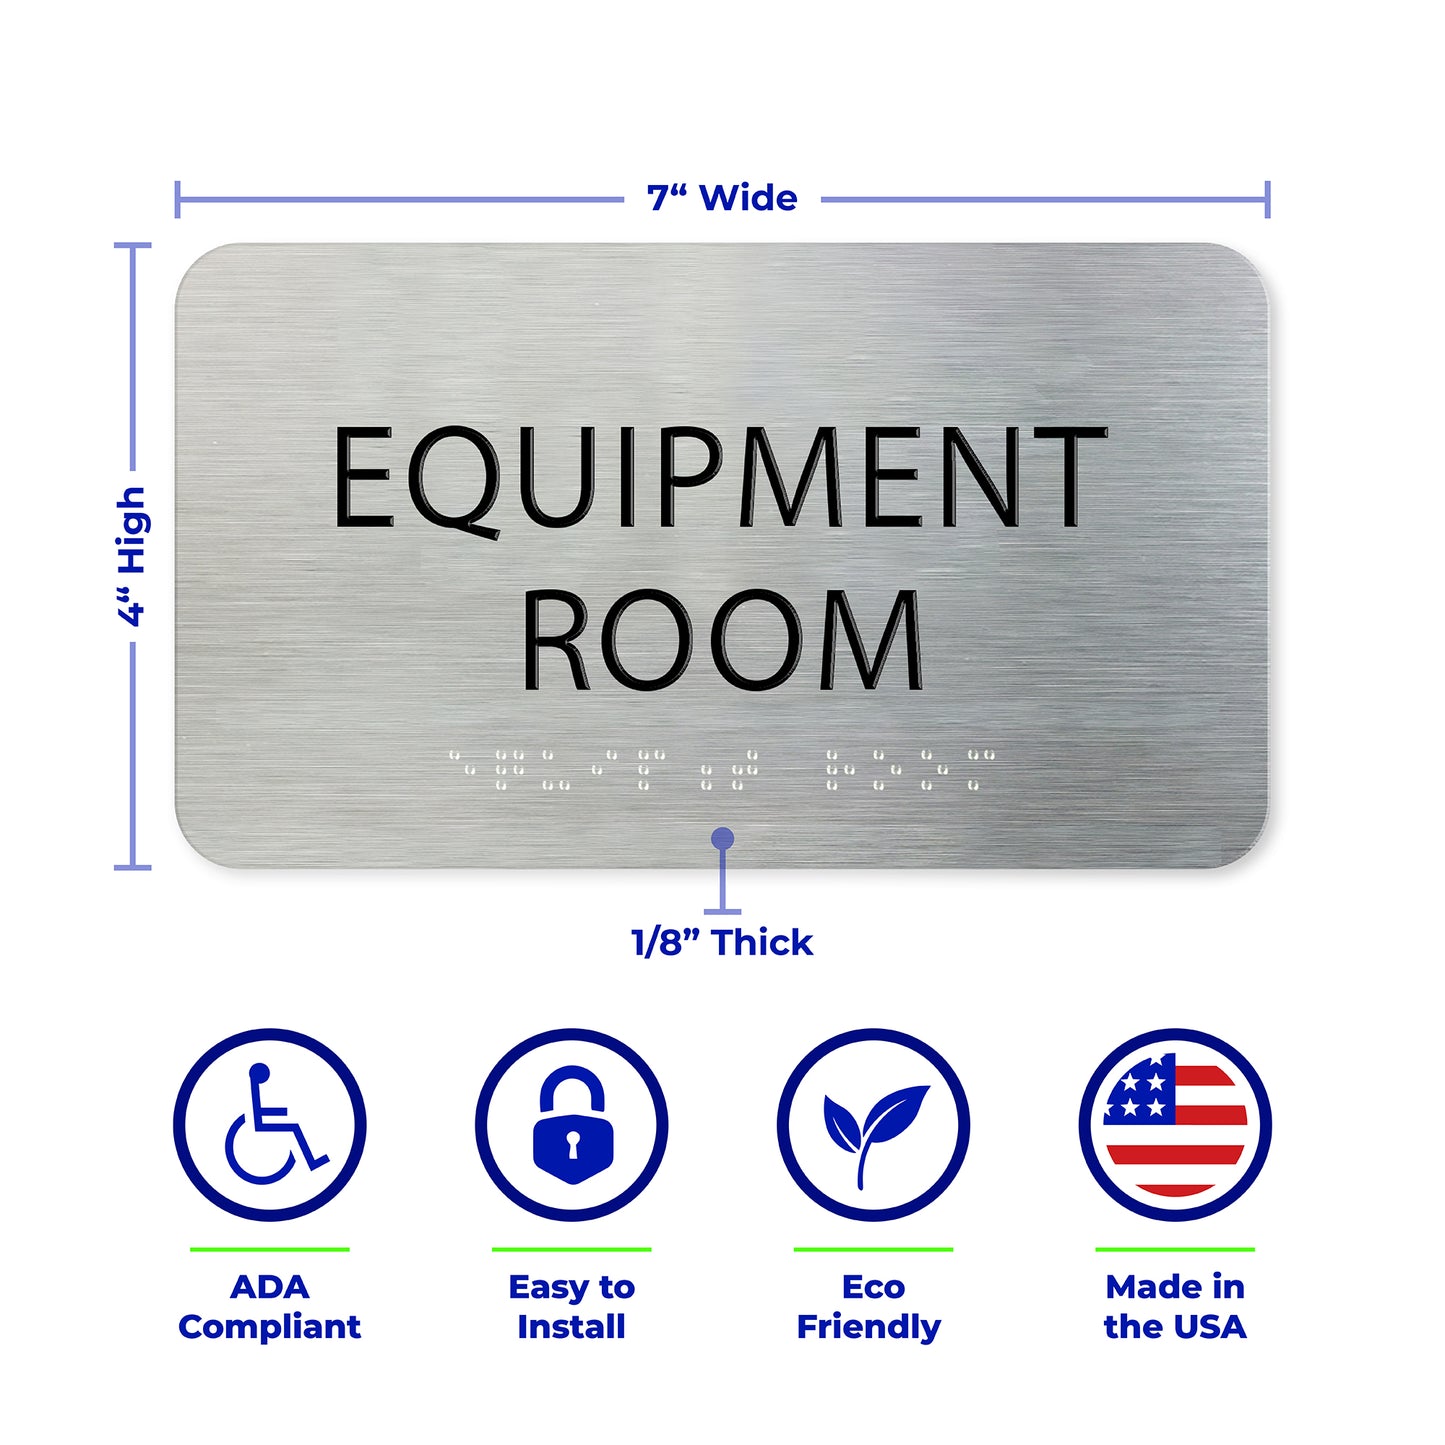 EQUIPMENT ROOM Sign, ADA compliant, Signage for Commercial Building, Aluminum Brushed Silver , Black Raised Text, Grade 2 Braille, 7" x 4"